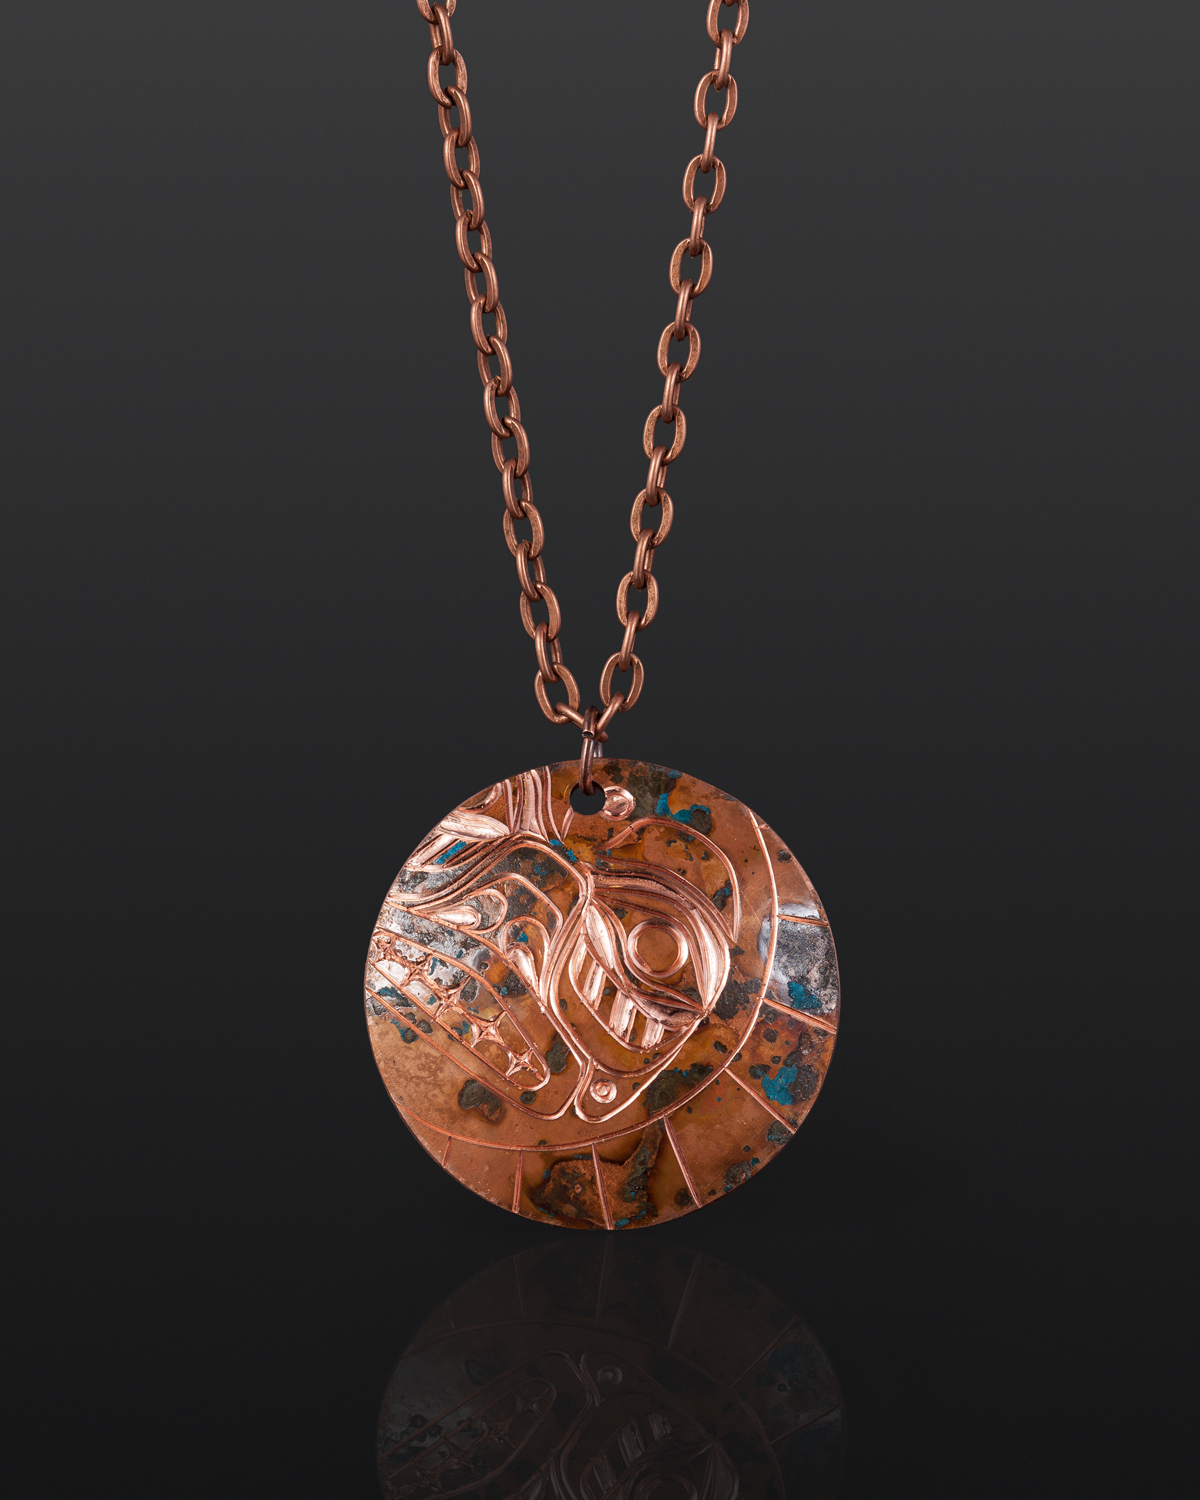 sun necklace jennifer younger tlingit copper carved jewelry necklace